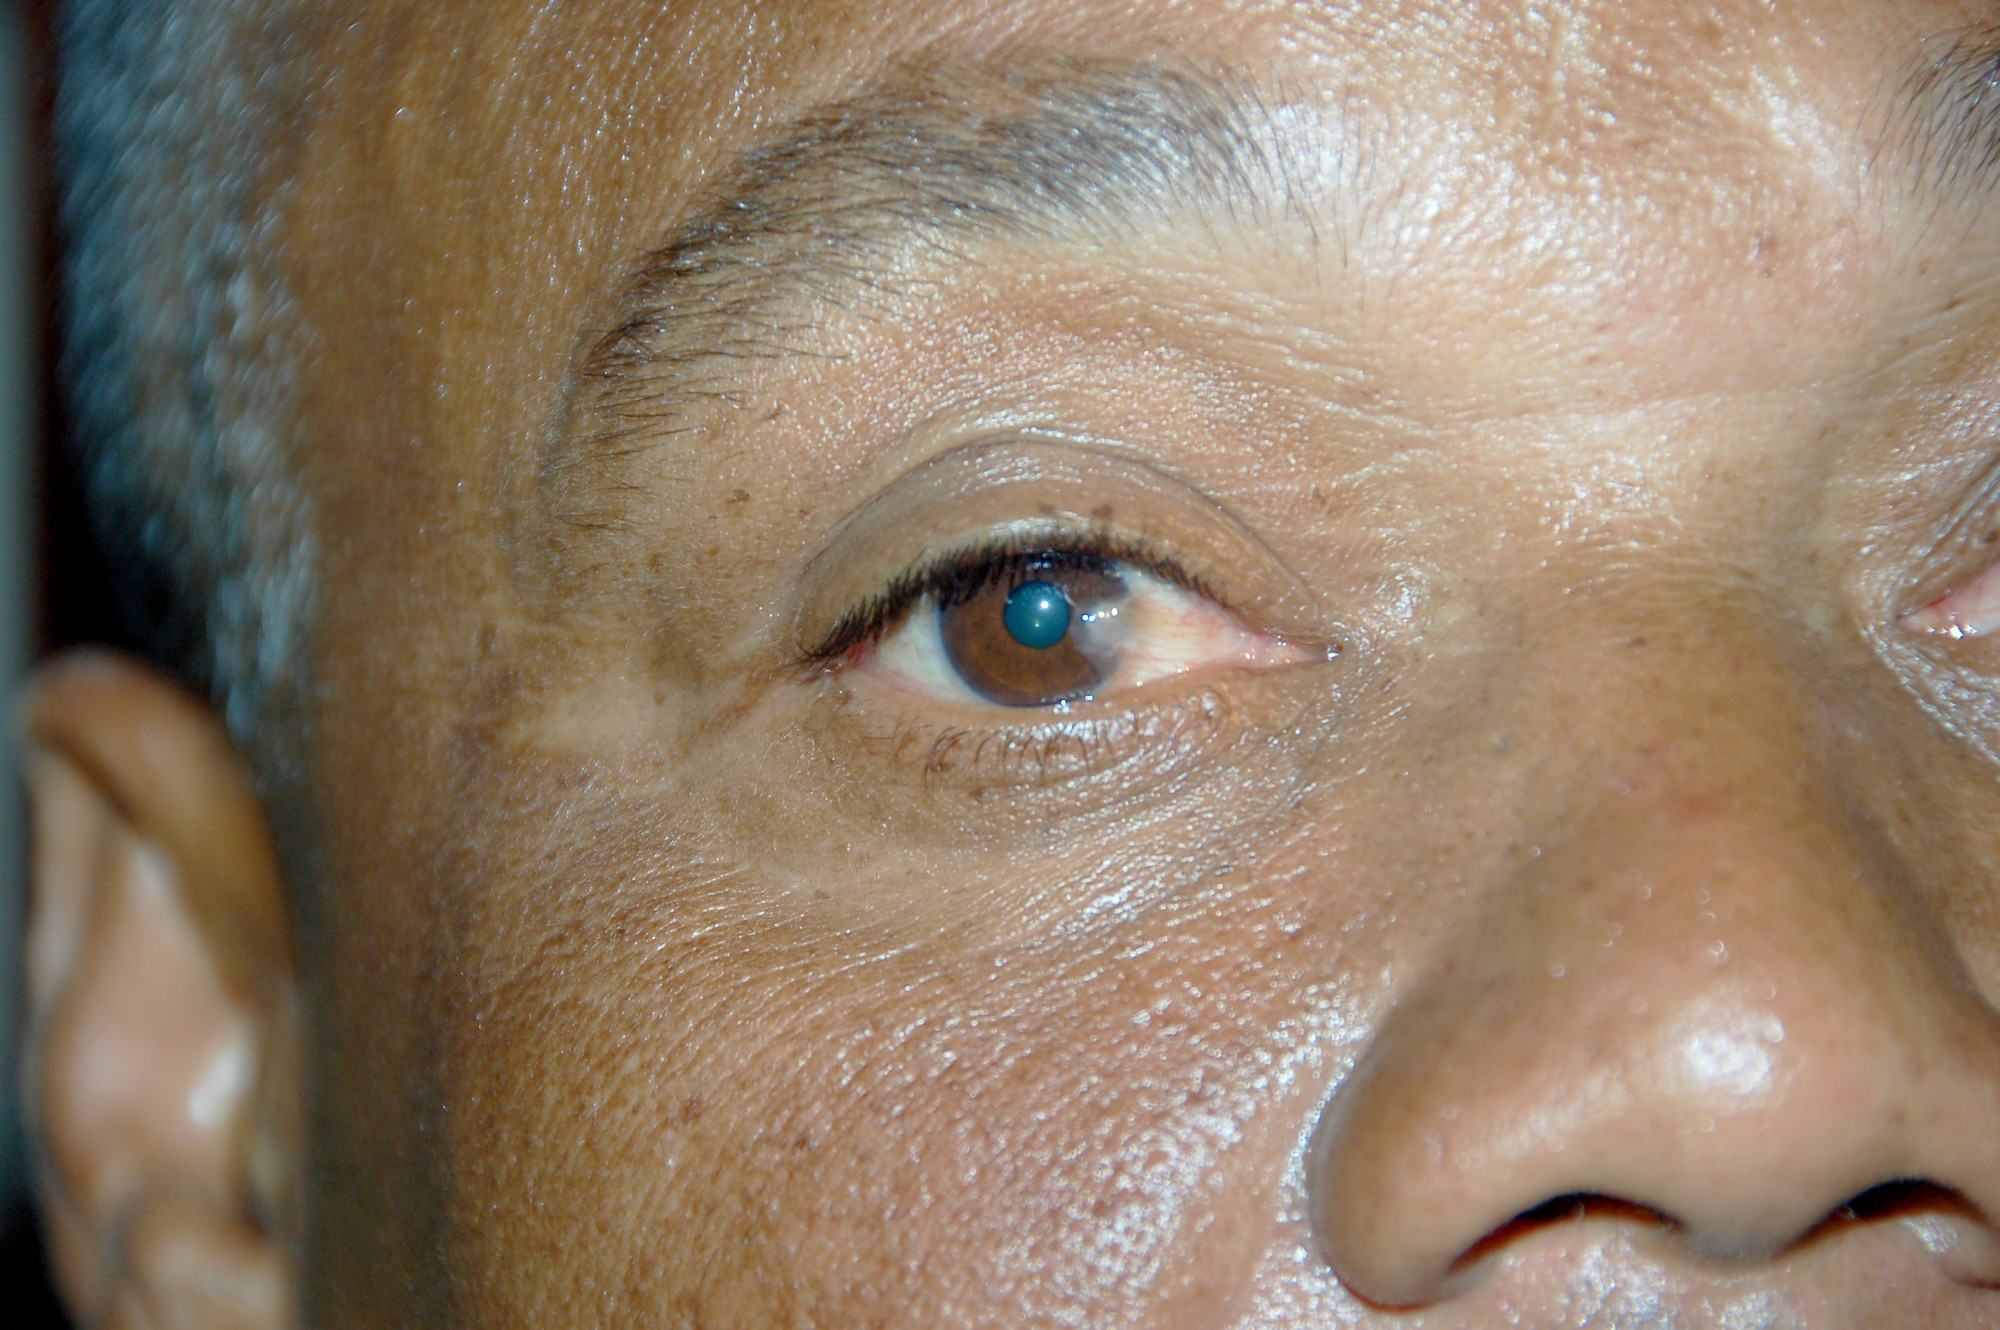 A patient with pterygiums, a condition where the white part of the eye begins to grow over the cornea and eventually over the pupil, and cataracts, which cause the pupils to appear cloudy receives optometric care from U.S. Air Force medics at a primary school in Hostos, Dom. Rep., April 22 during the largest Maxwell Air Force Base-planned U.S. Air Force Medical Readiness Training Exercise (MEDRETE) to date. A group of 45 medics, translators, security and support personnel derived from the U.S. Air Force, Army and Marines provided dental, dermatologic, general medicine, optometric, pediatric, pharmacy and public health services. The medics treated approximately 4,000 patients during the first four days of the U.S. SOUTHCOM sponsored Beyond the Horizon 2009 – Caribbean. A MEDRETE is a U. S. Southern command-sponsored exercise designed to provide humanitarian assistance and free medical care to the people of the host nation, while providing an unparalleled training opportunity for U.S. and host nation forces. SOUTHCOM sponsors approximately 70 MEDRETEs per year. (U.S. Air Force Photo by Capt. Ben Sakrisson)